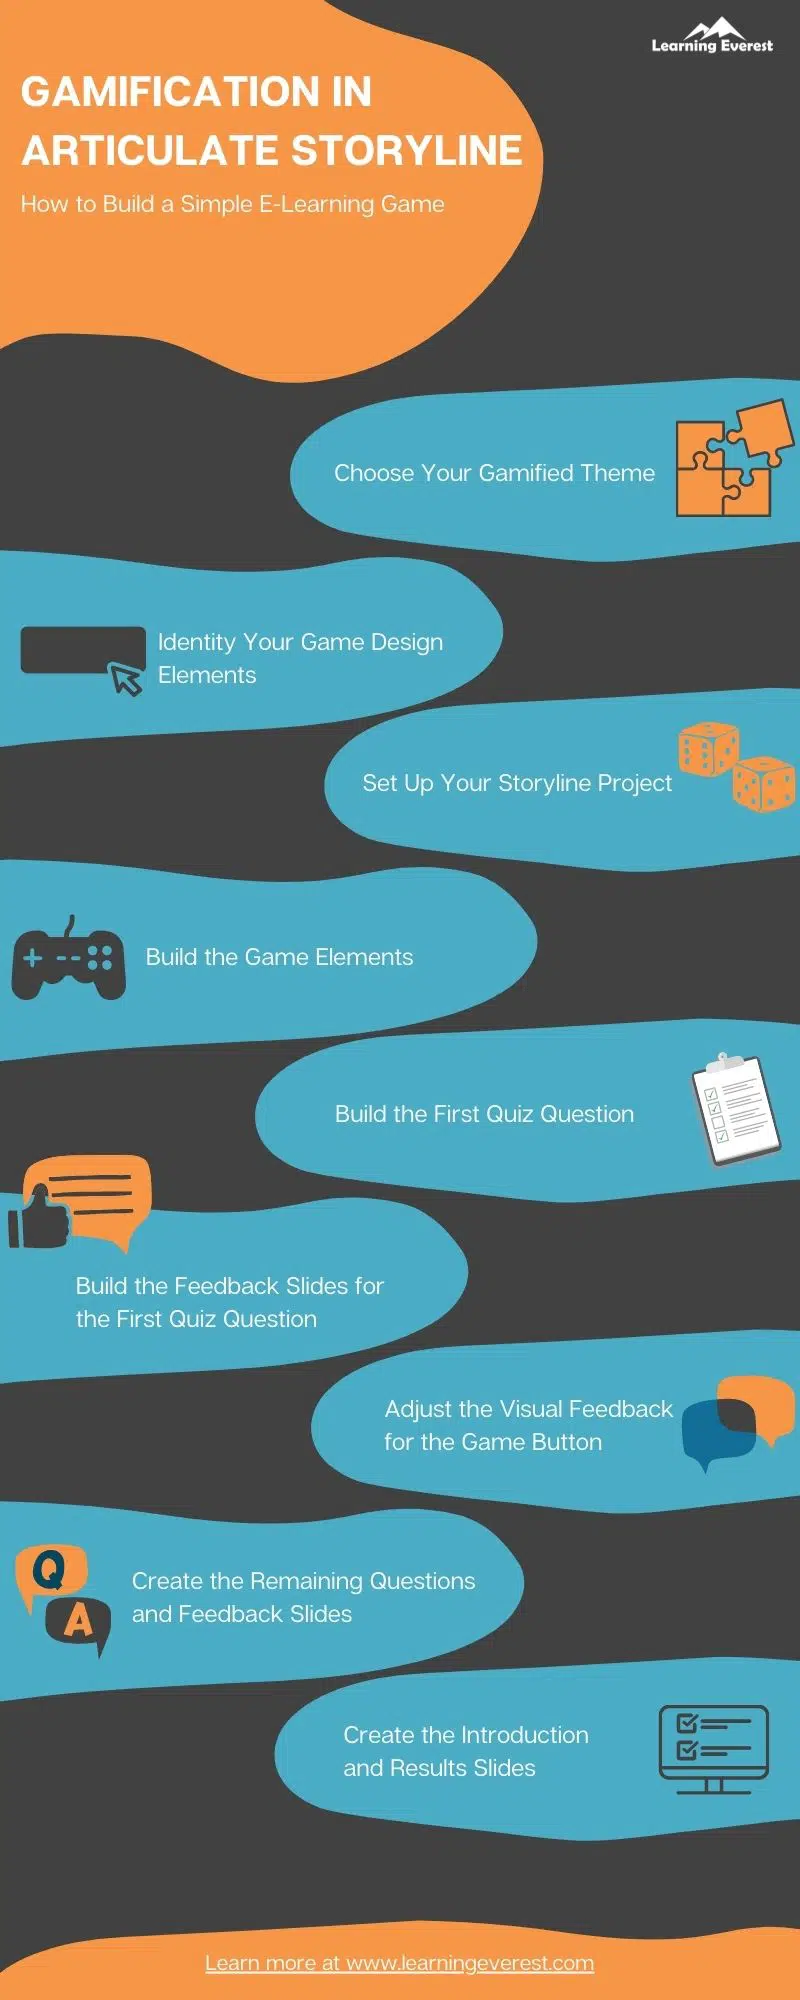 Gamification in Articulate Storyline